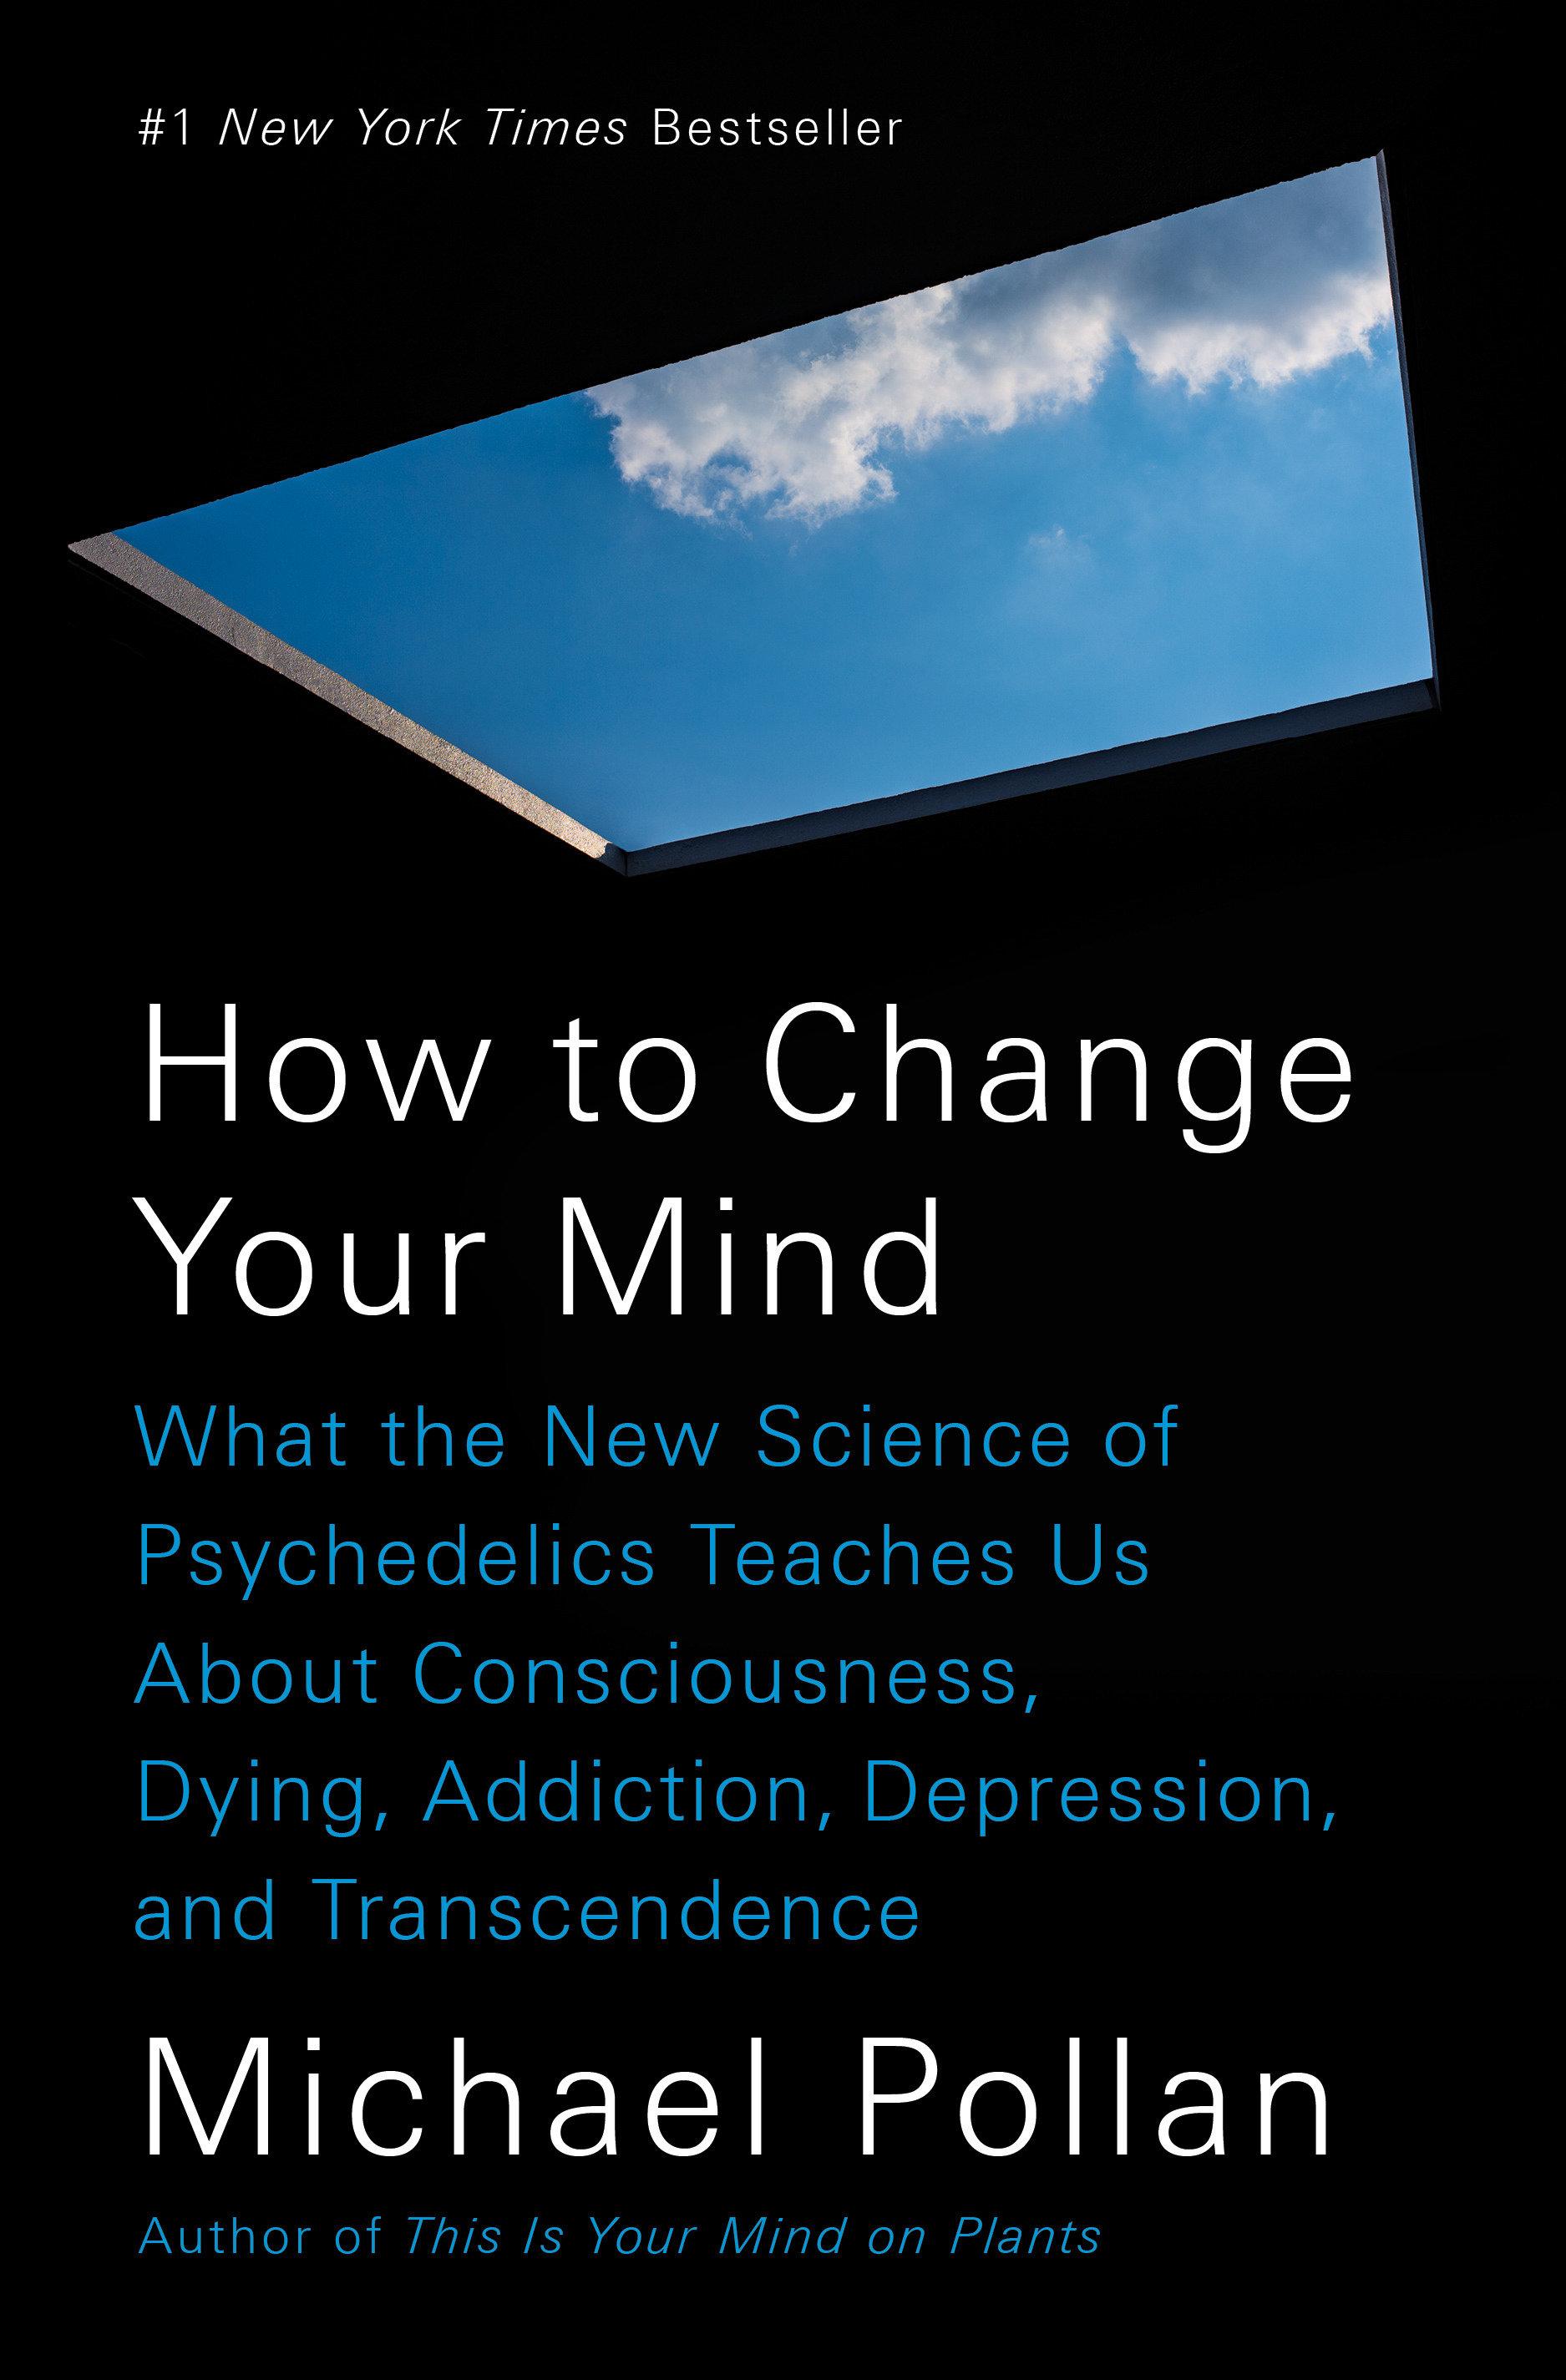 How to Change Your Mind / What the New Science of Psychedelics Teaches Us About Consciousness, Dying, Addiction, Depression, and Transcendence / Michael Pollan / Buch / Einband - fest (Hardcover) - Pollan, Michael